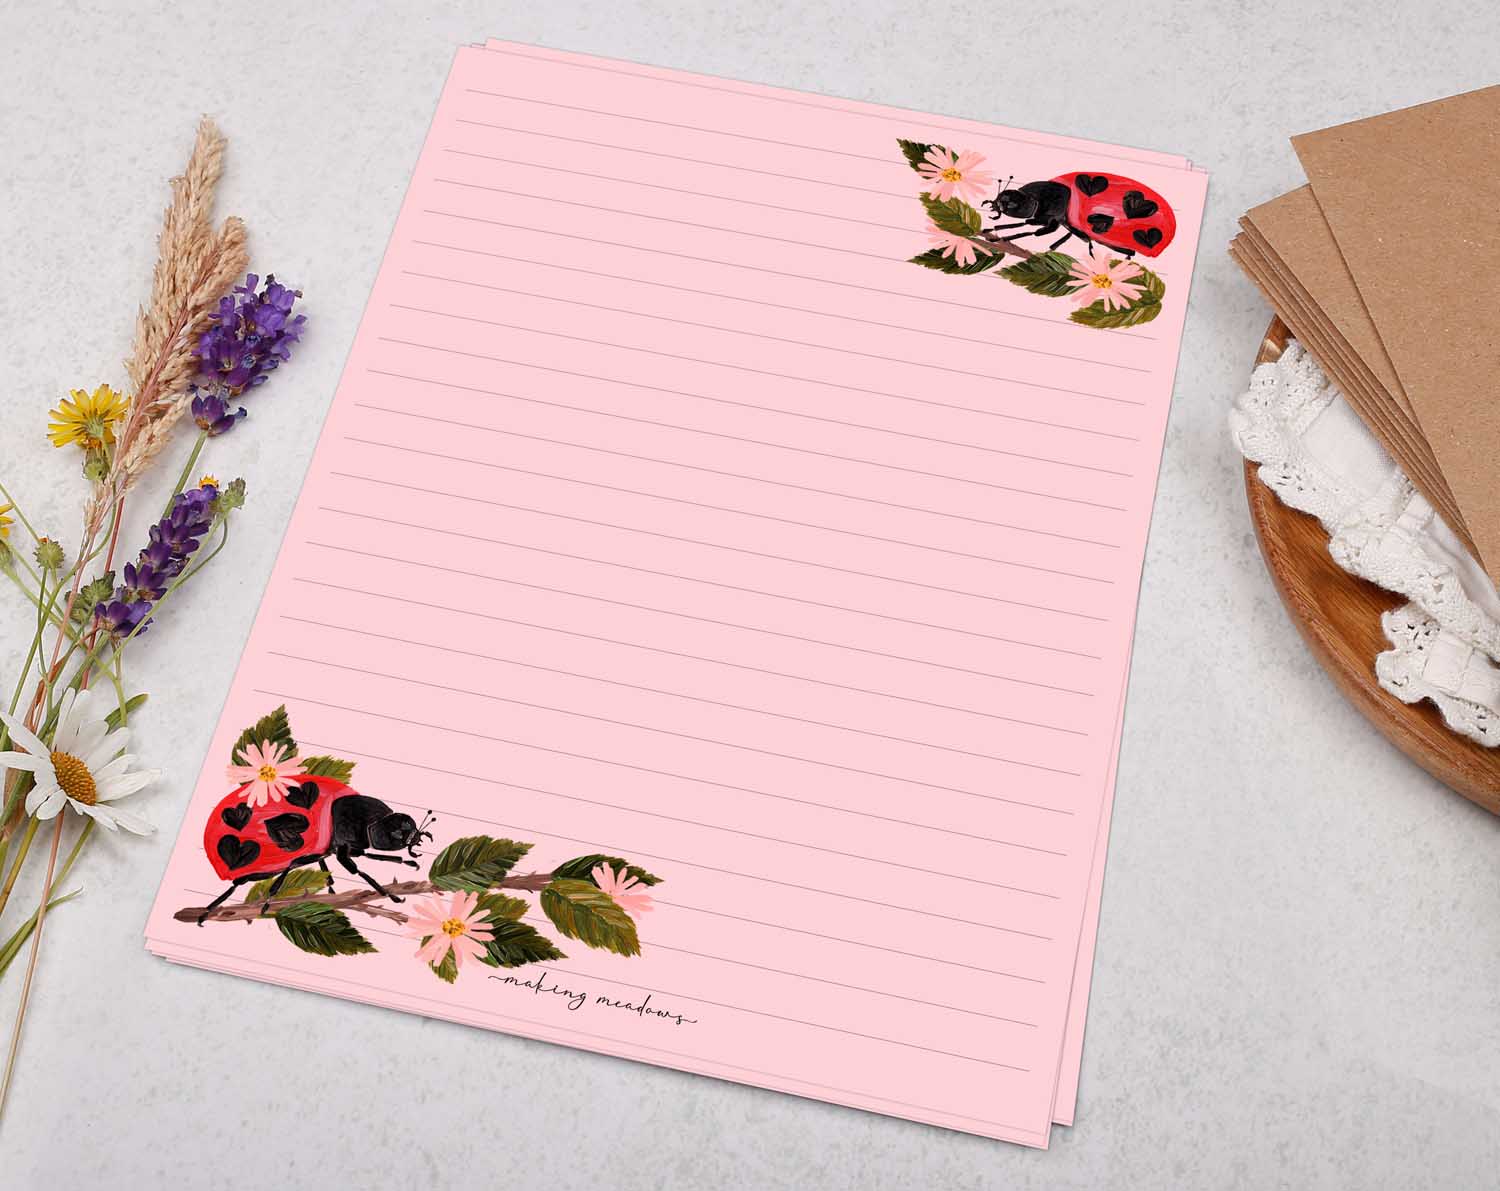 Pink A5 letter writing paper sheets with ladybird bugs